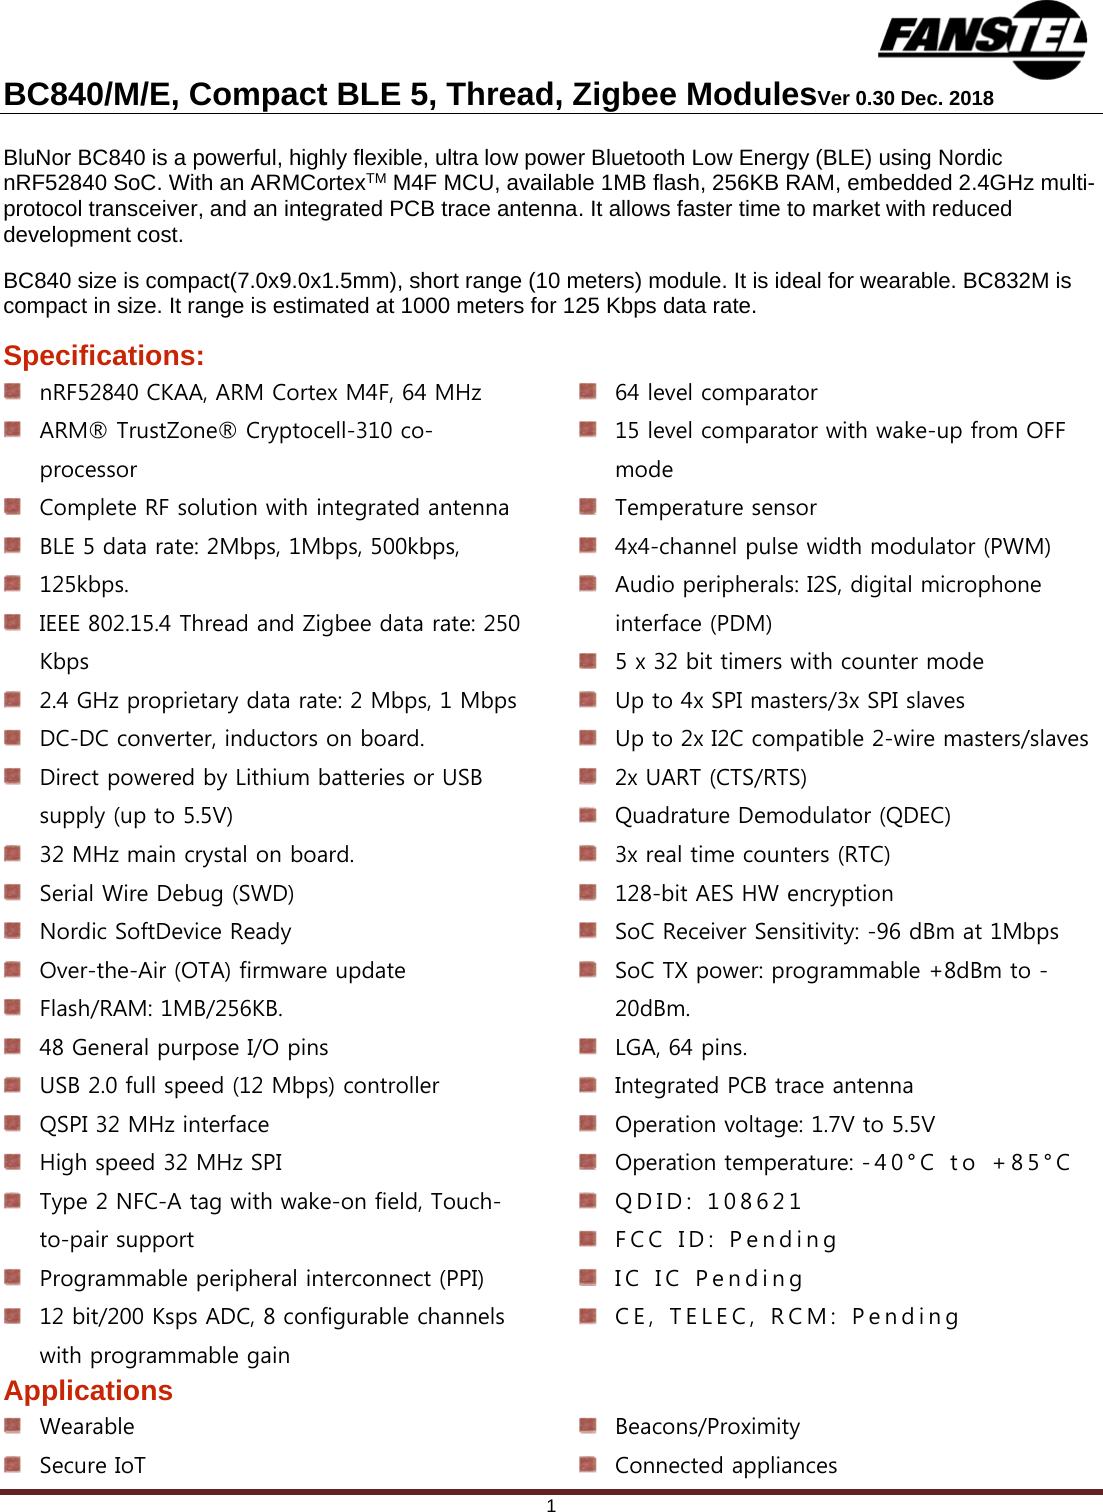 Page 1 of Fanstel Taipei BC840M Bluetooth 5.0 Module User Manual 